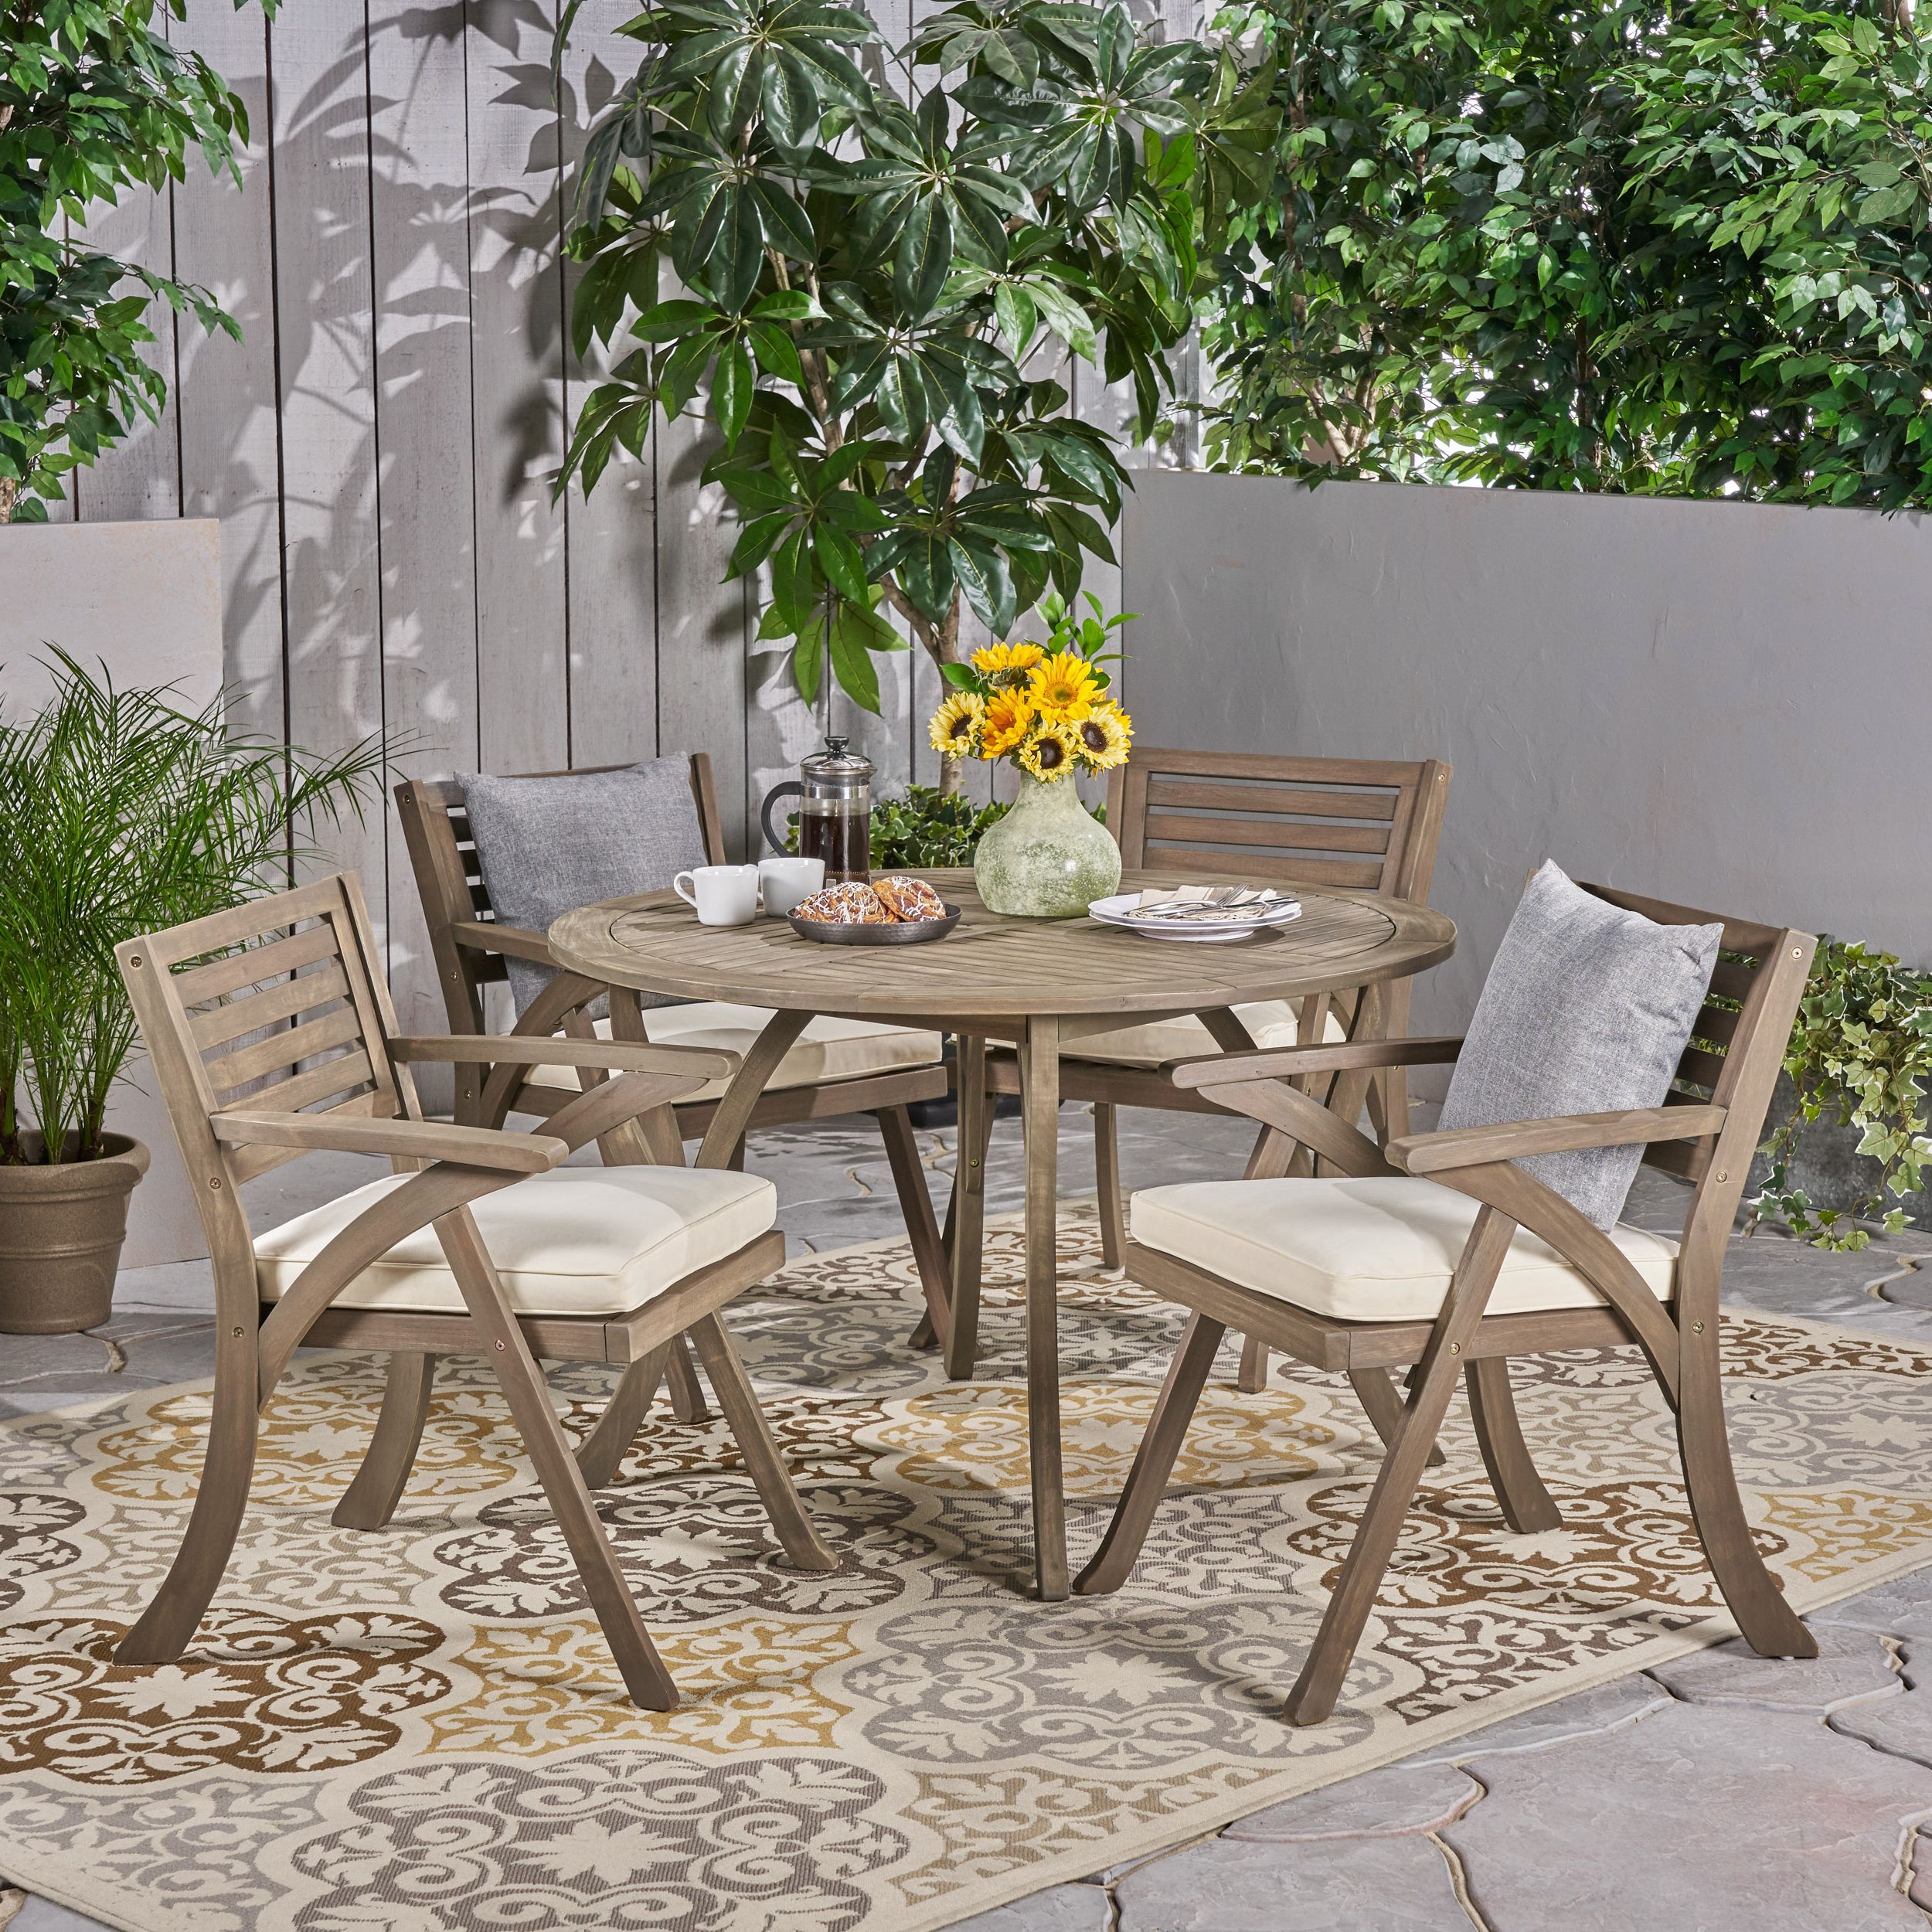 Preferred Jordy Outdoor 5 Piece Acacia Wood Dining Set With Round Table, Gray With Regard To 5 Piece Outdoor Bench Dining Sets (View 3 of 15)